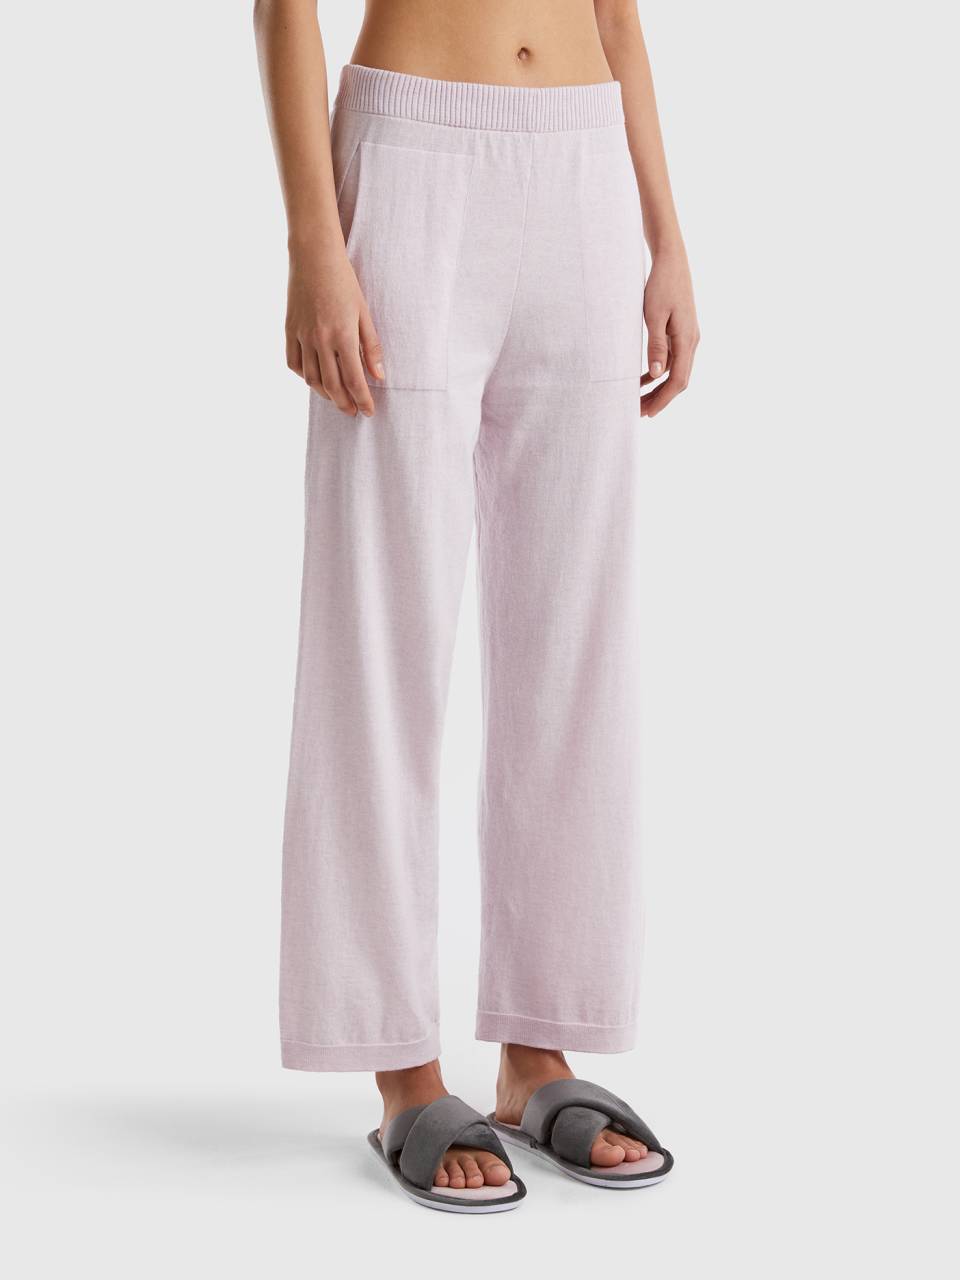 Benetton trousers in cashmere blend. 1